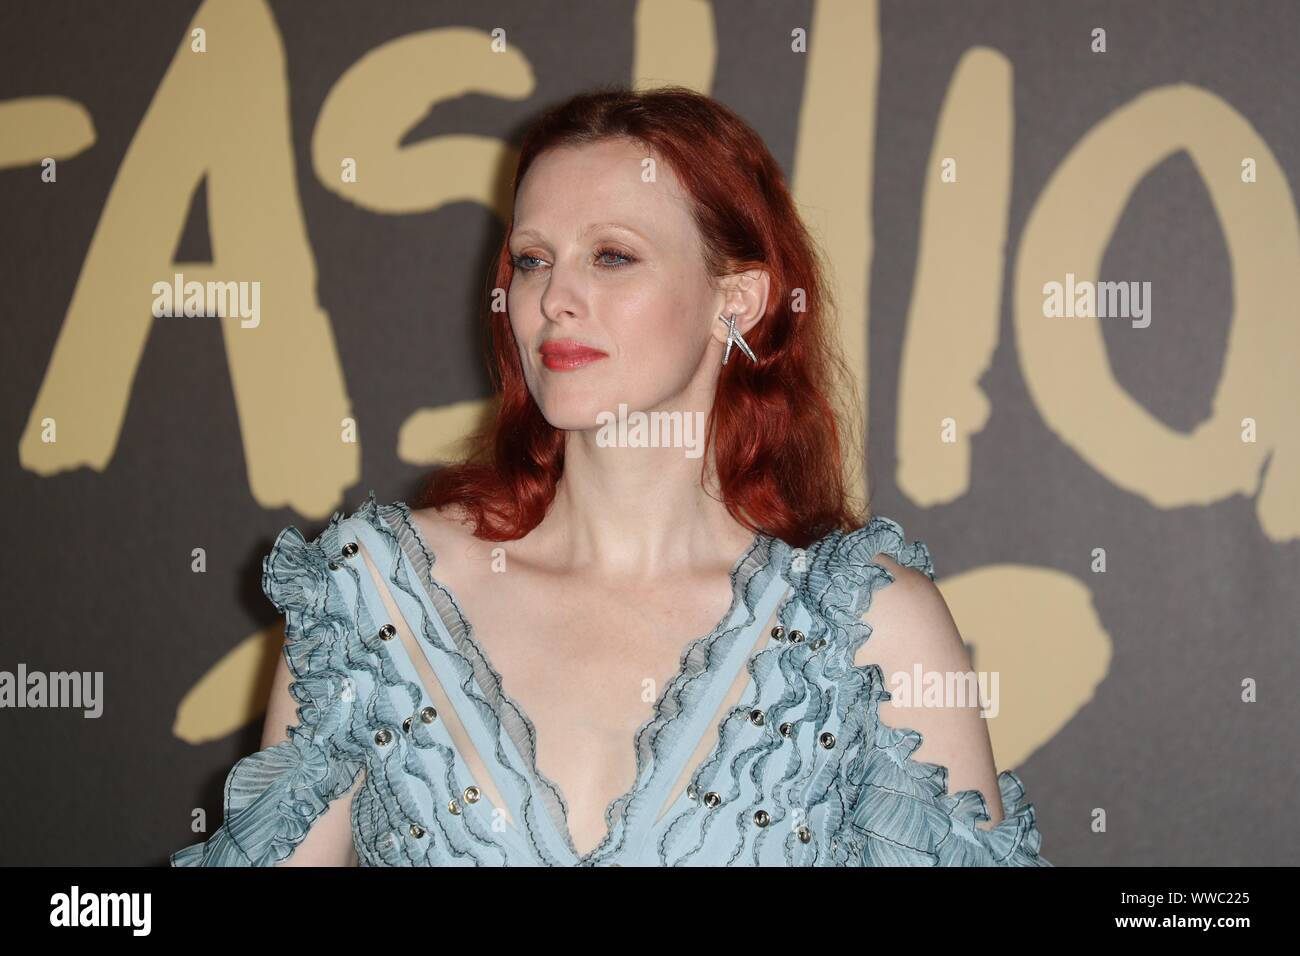 London, UK, 14th Sep 2019, Karen Elson at Naomi Campbell’s Fashion for Relief. Credit: Uwe Deffner / Alamy Live News Stock Photo